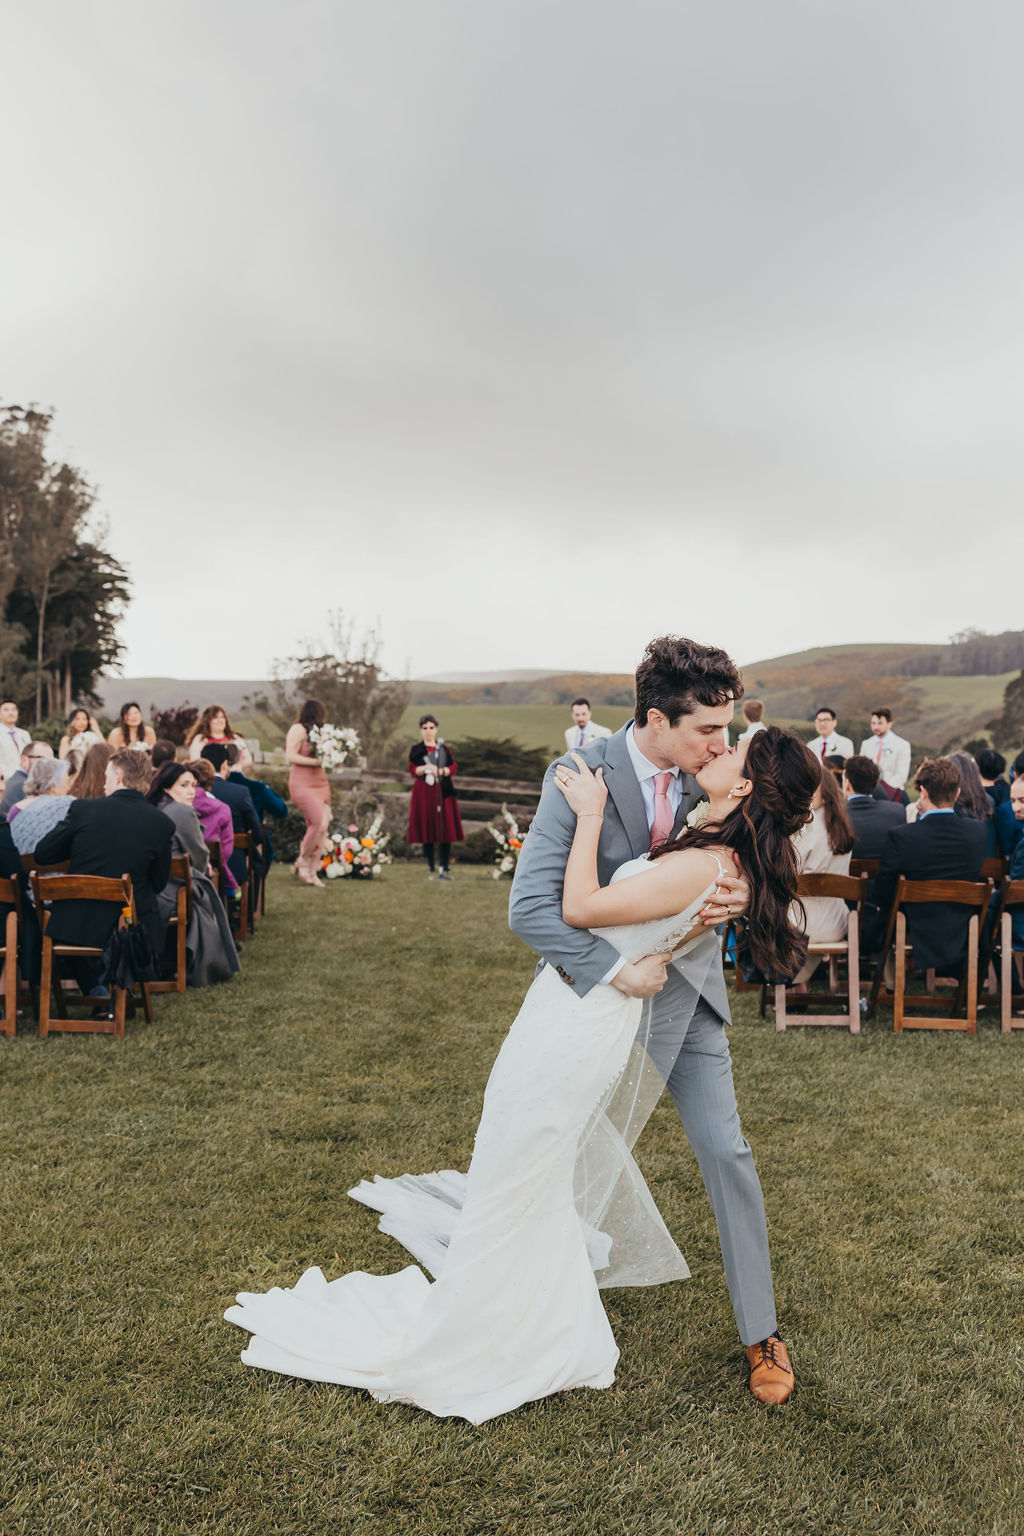 A bride and groom are standing outdoors, holding hands, and facing each other. The groom is wearing a light gray suit with a pink tie, and the bride is in a white dress with lace details and a flower in her hair at the haven at tomales